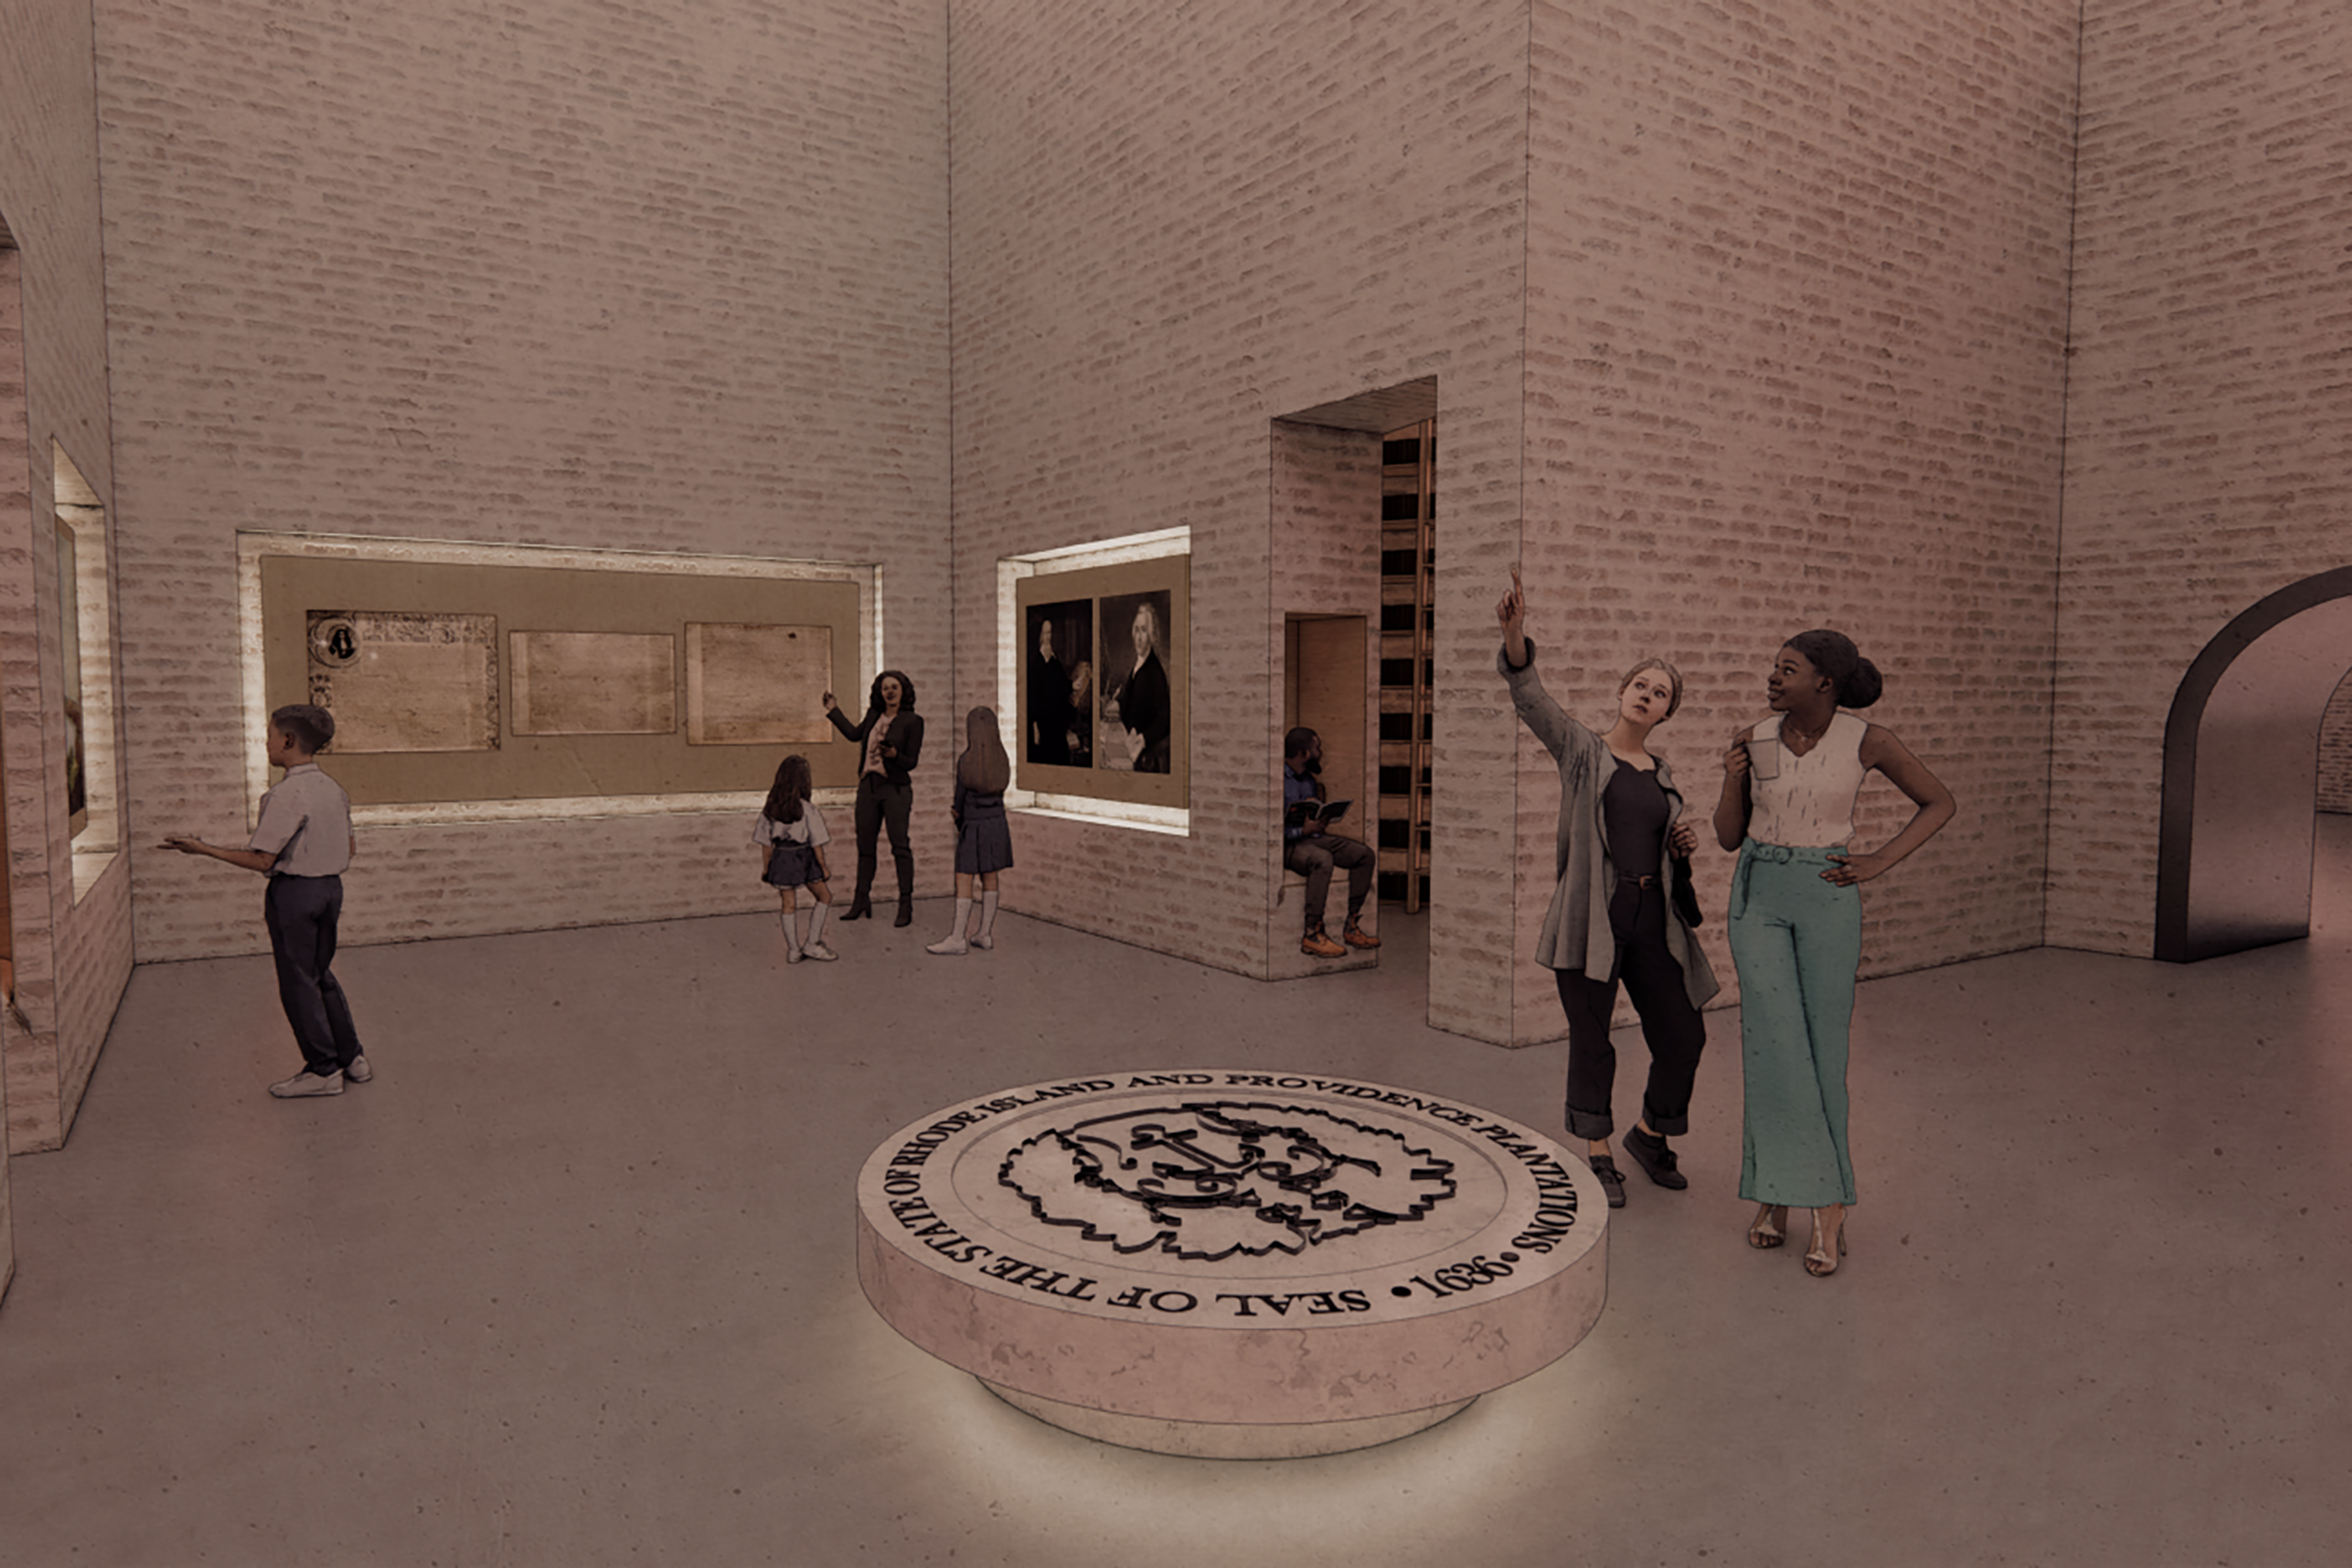 rendering of a subterranean museum focused on state history